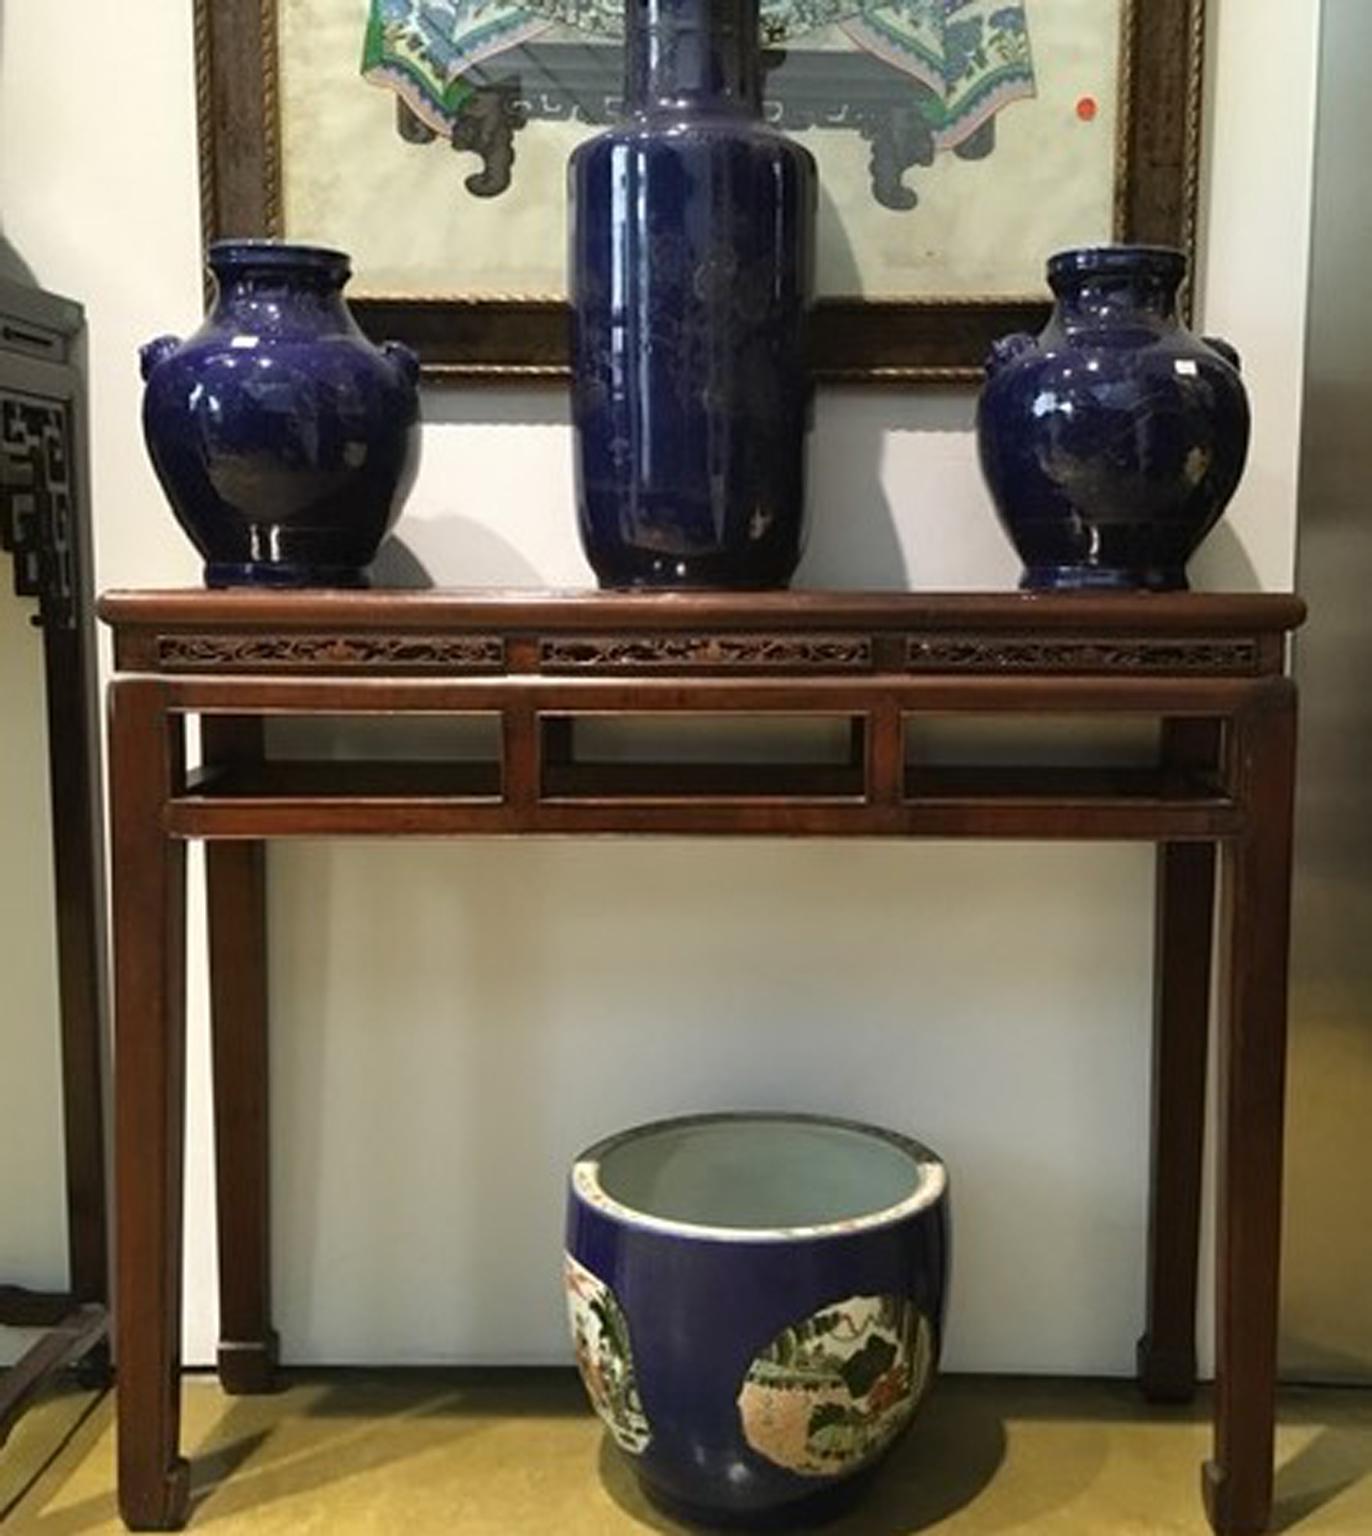 Pair of elmwood consoles coming from Eastern China, finely handcrafted in the late 19th century. Two timeless elegance pieces, easy to place in an entry way, or to the side of the fireplace. Useful their thin depth.
Top in solid elmwood too.
Not